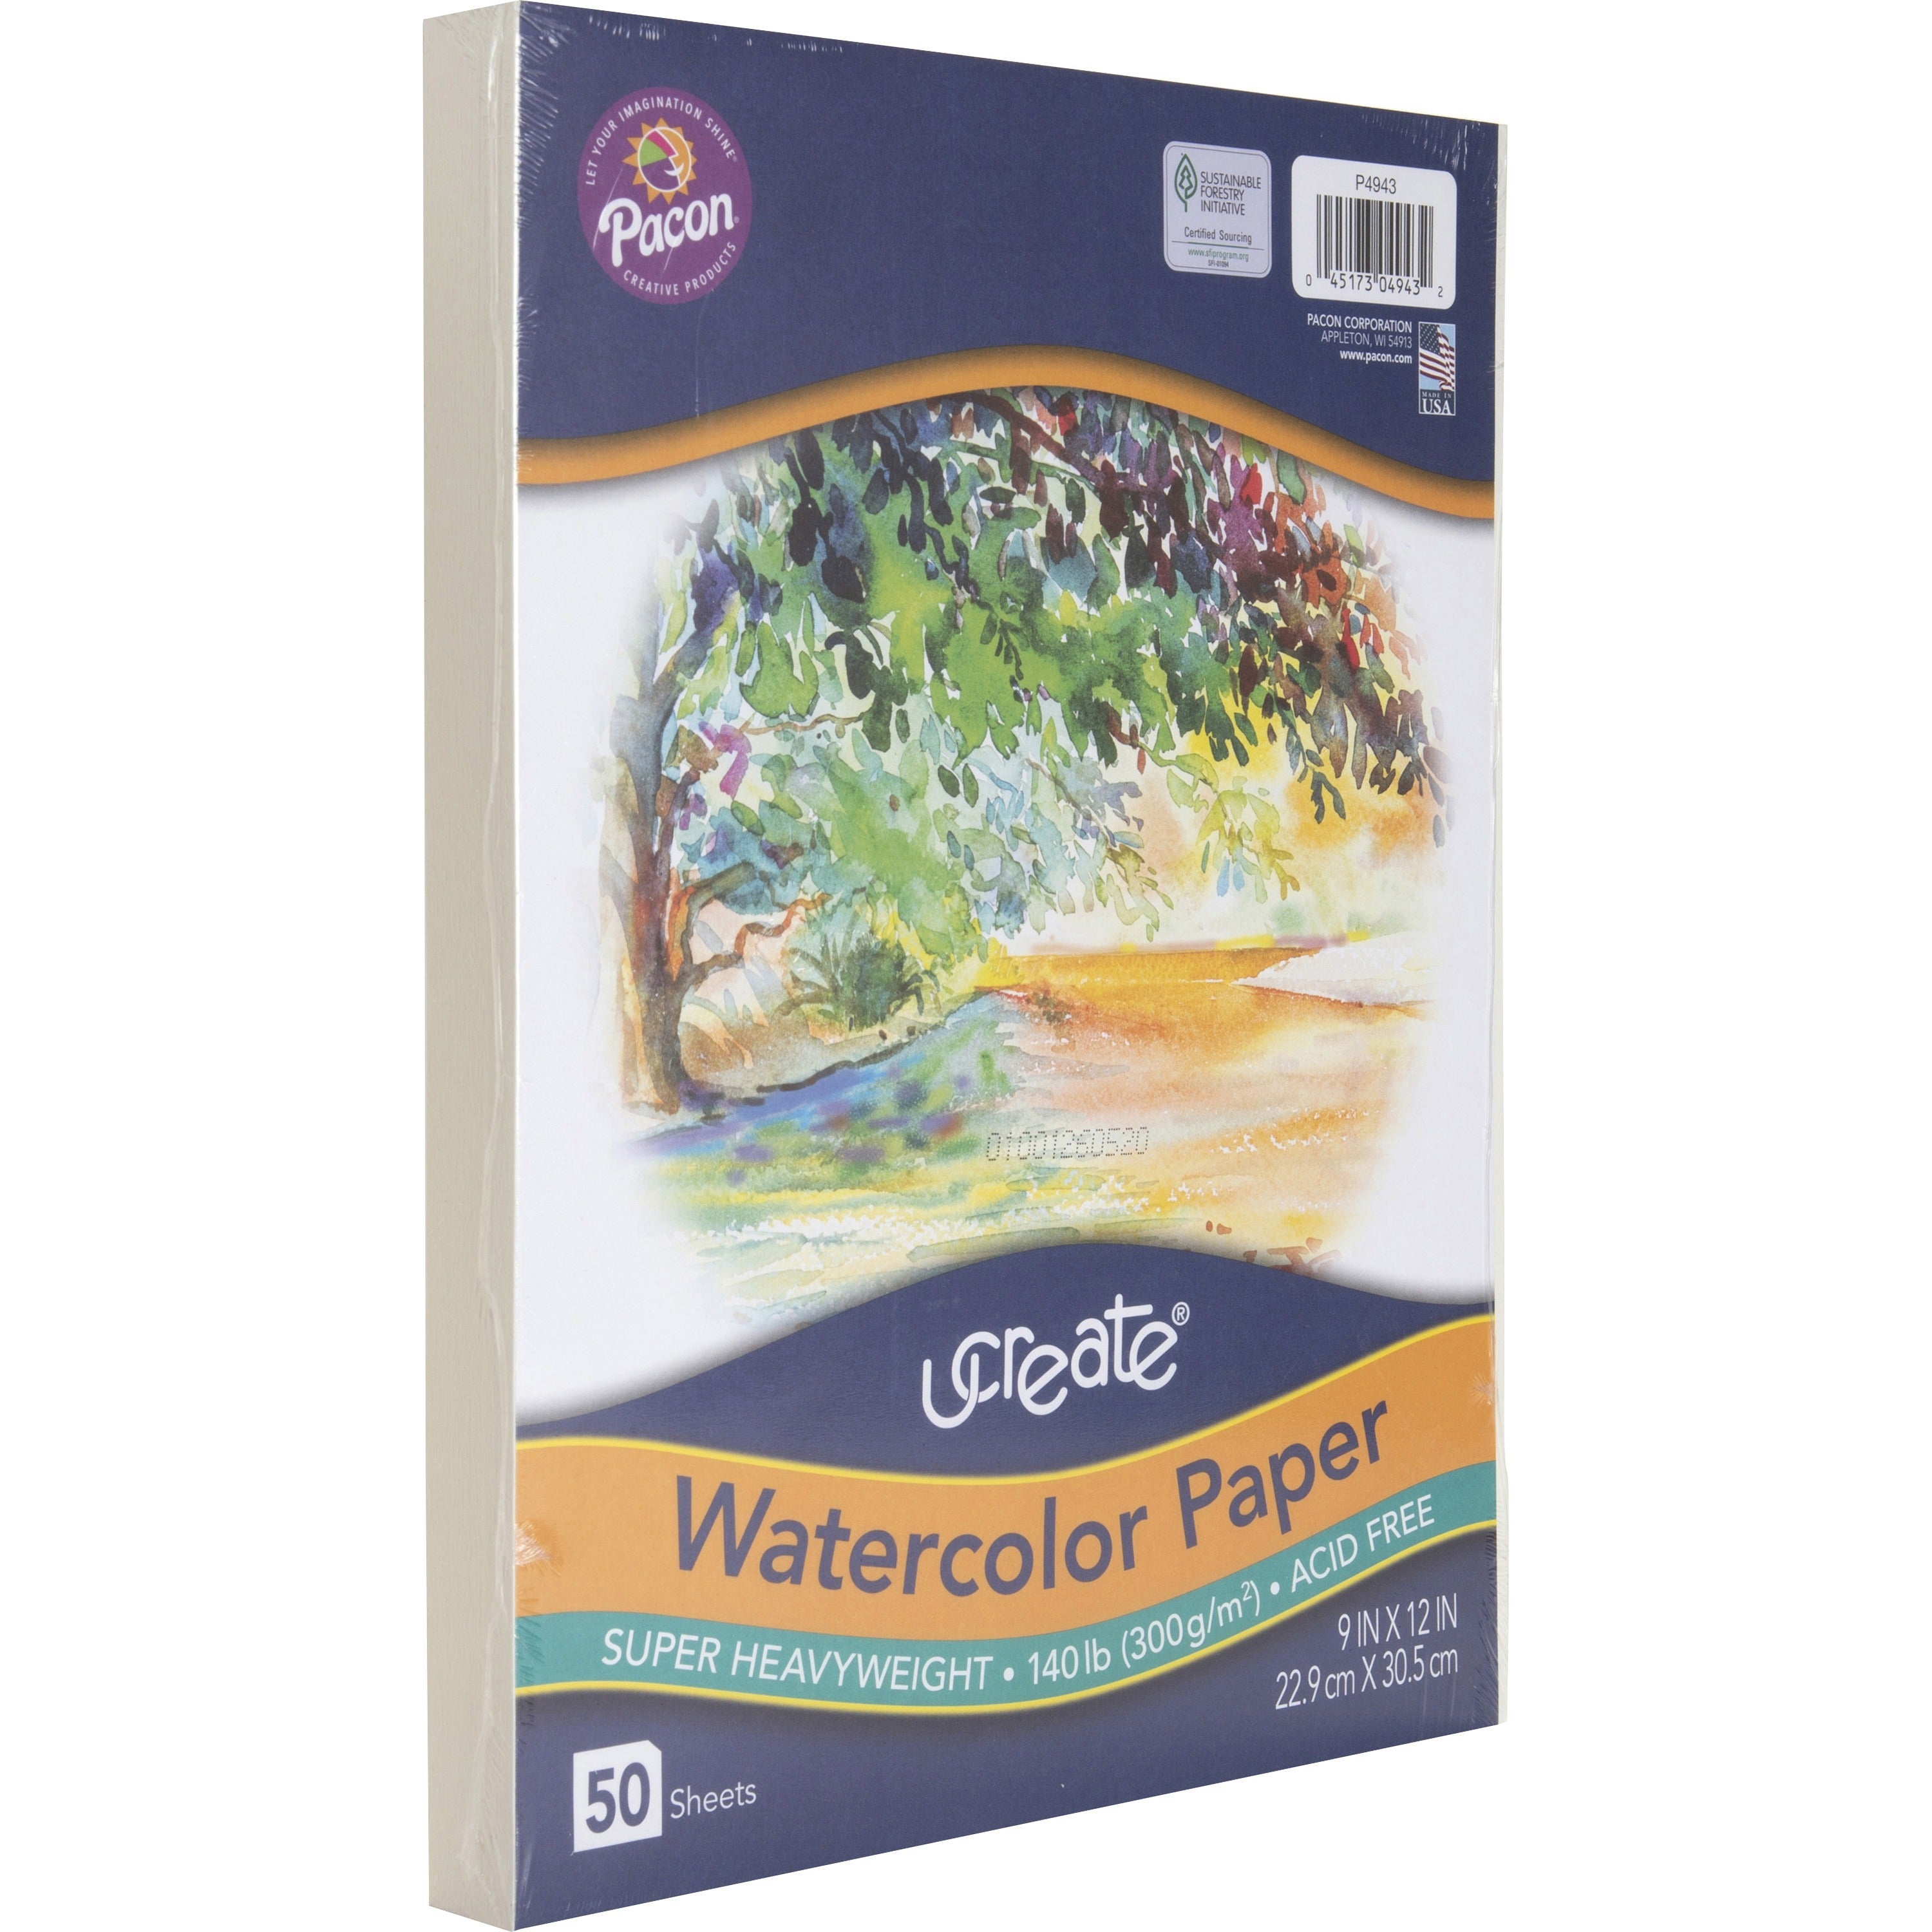 ucreate-watercolor-paper-140-lb-basis-weight-9-x-12-white-paper-acid-free-recyclable-50-pack_pacp4943 - 2